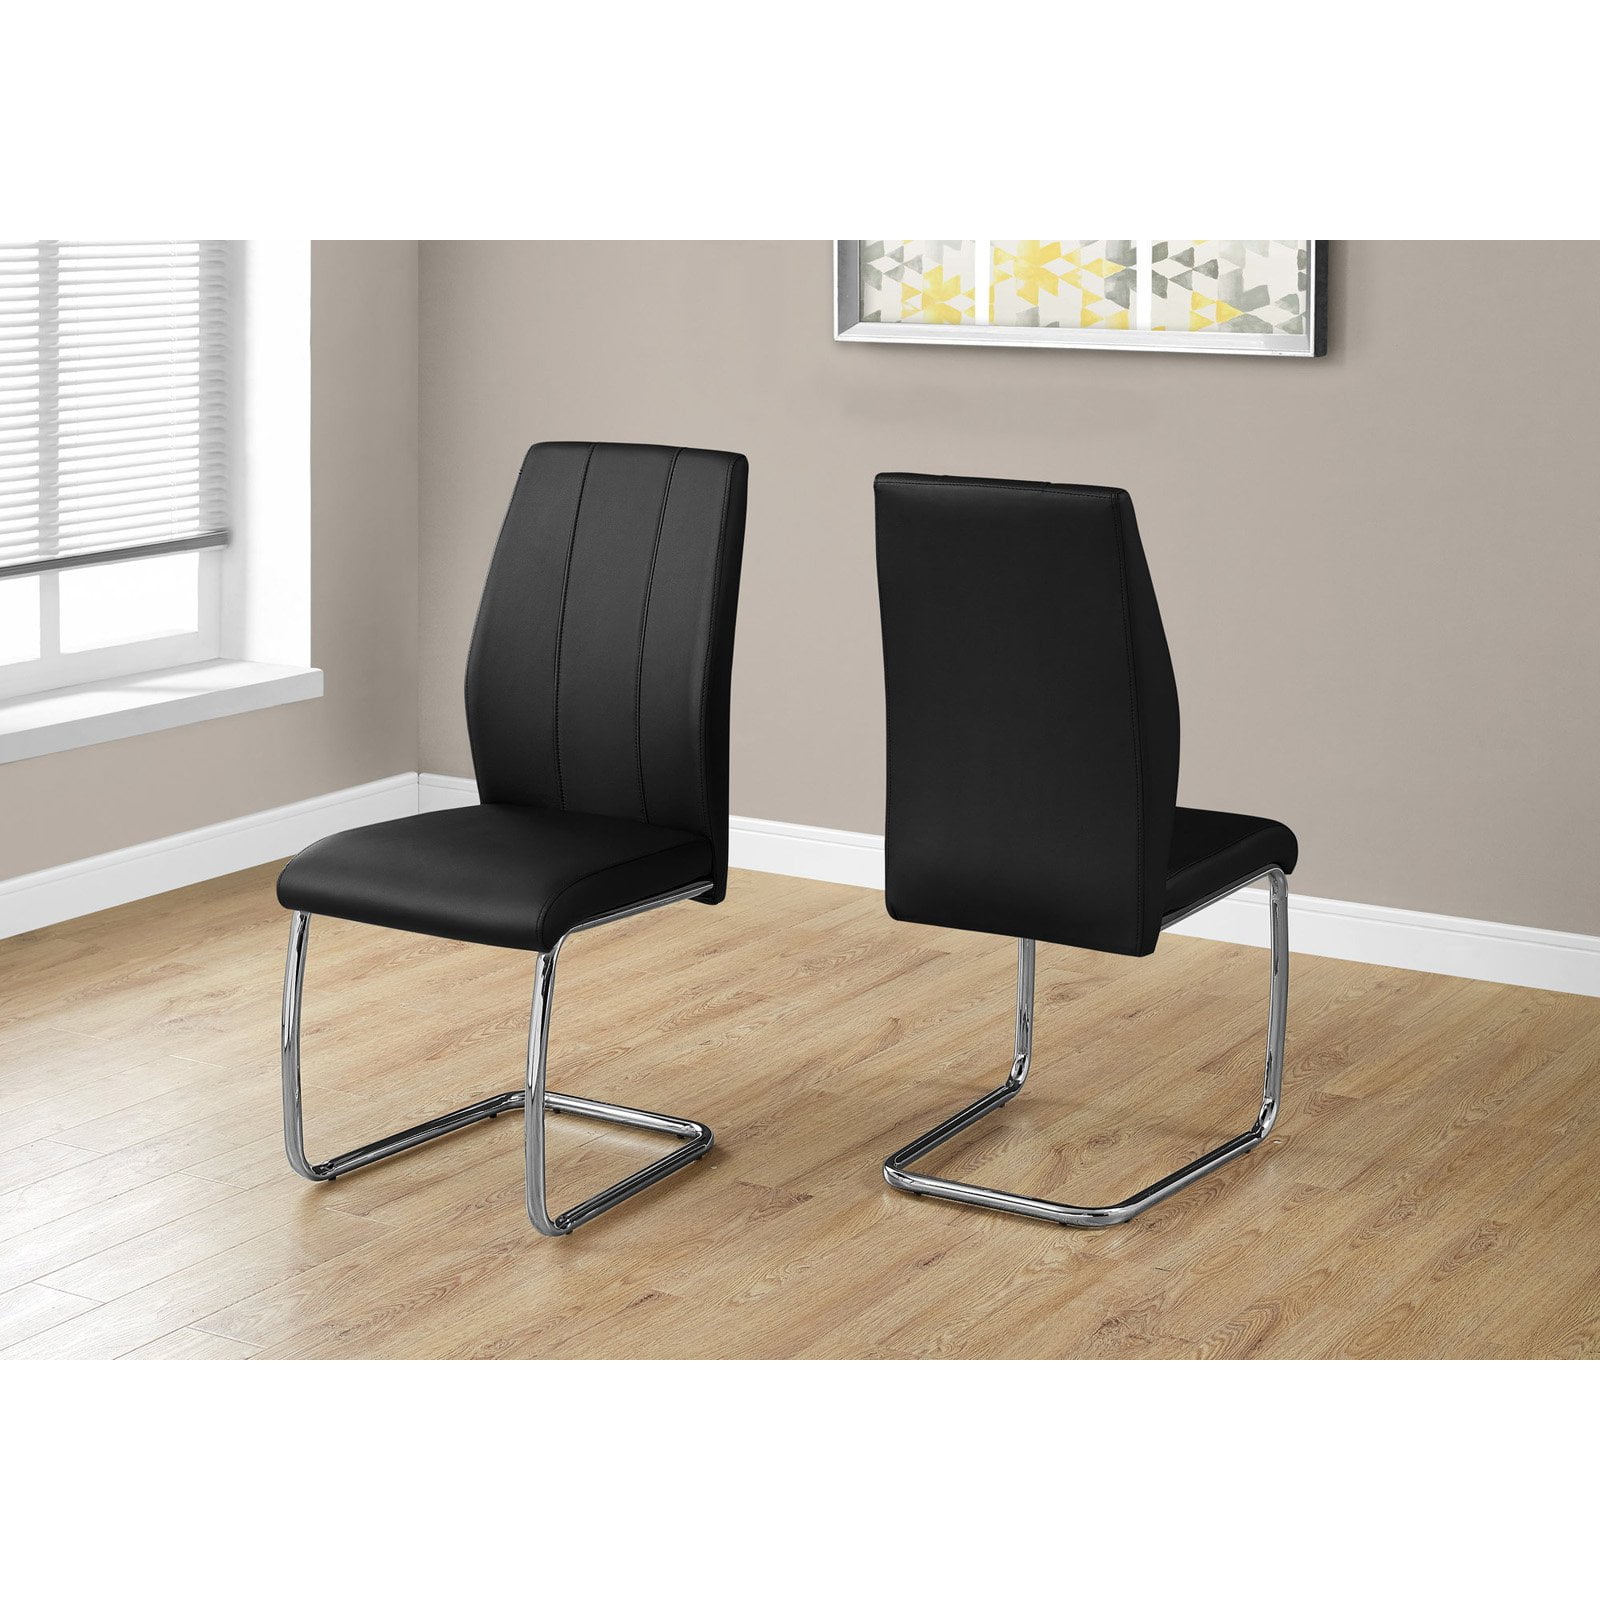 Chrome Dining Chairs H102cm Black Faux Leather TEMPLE Price for 2 Chairs 